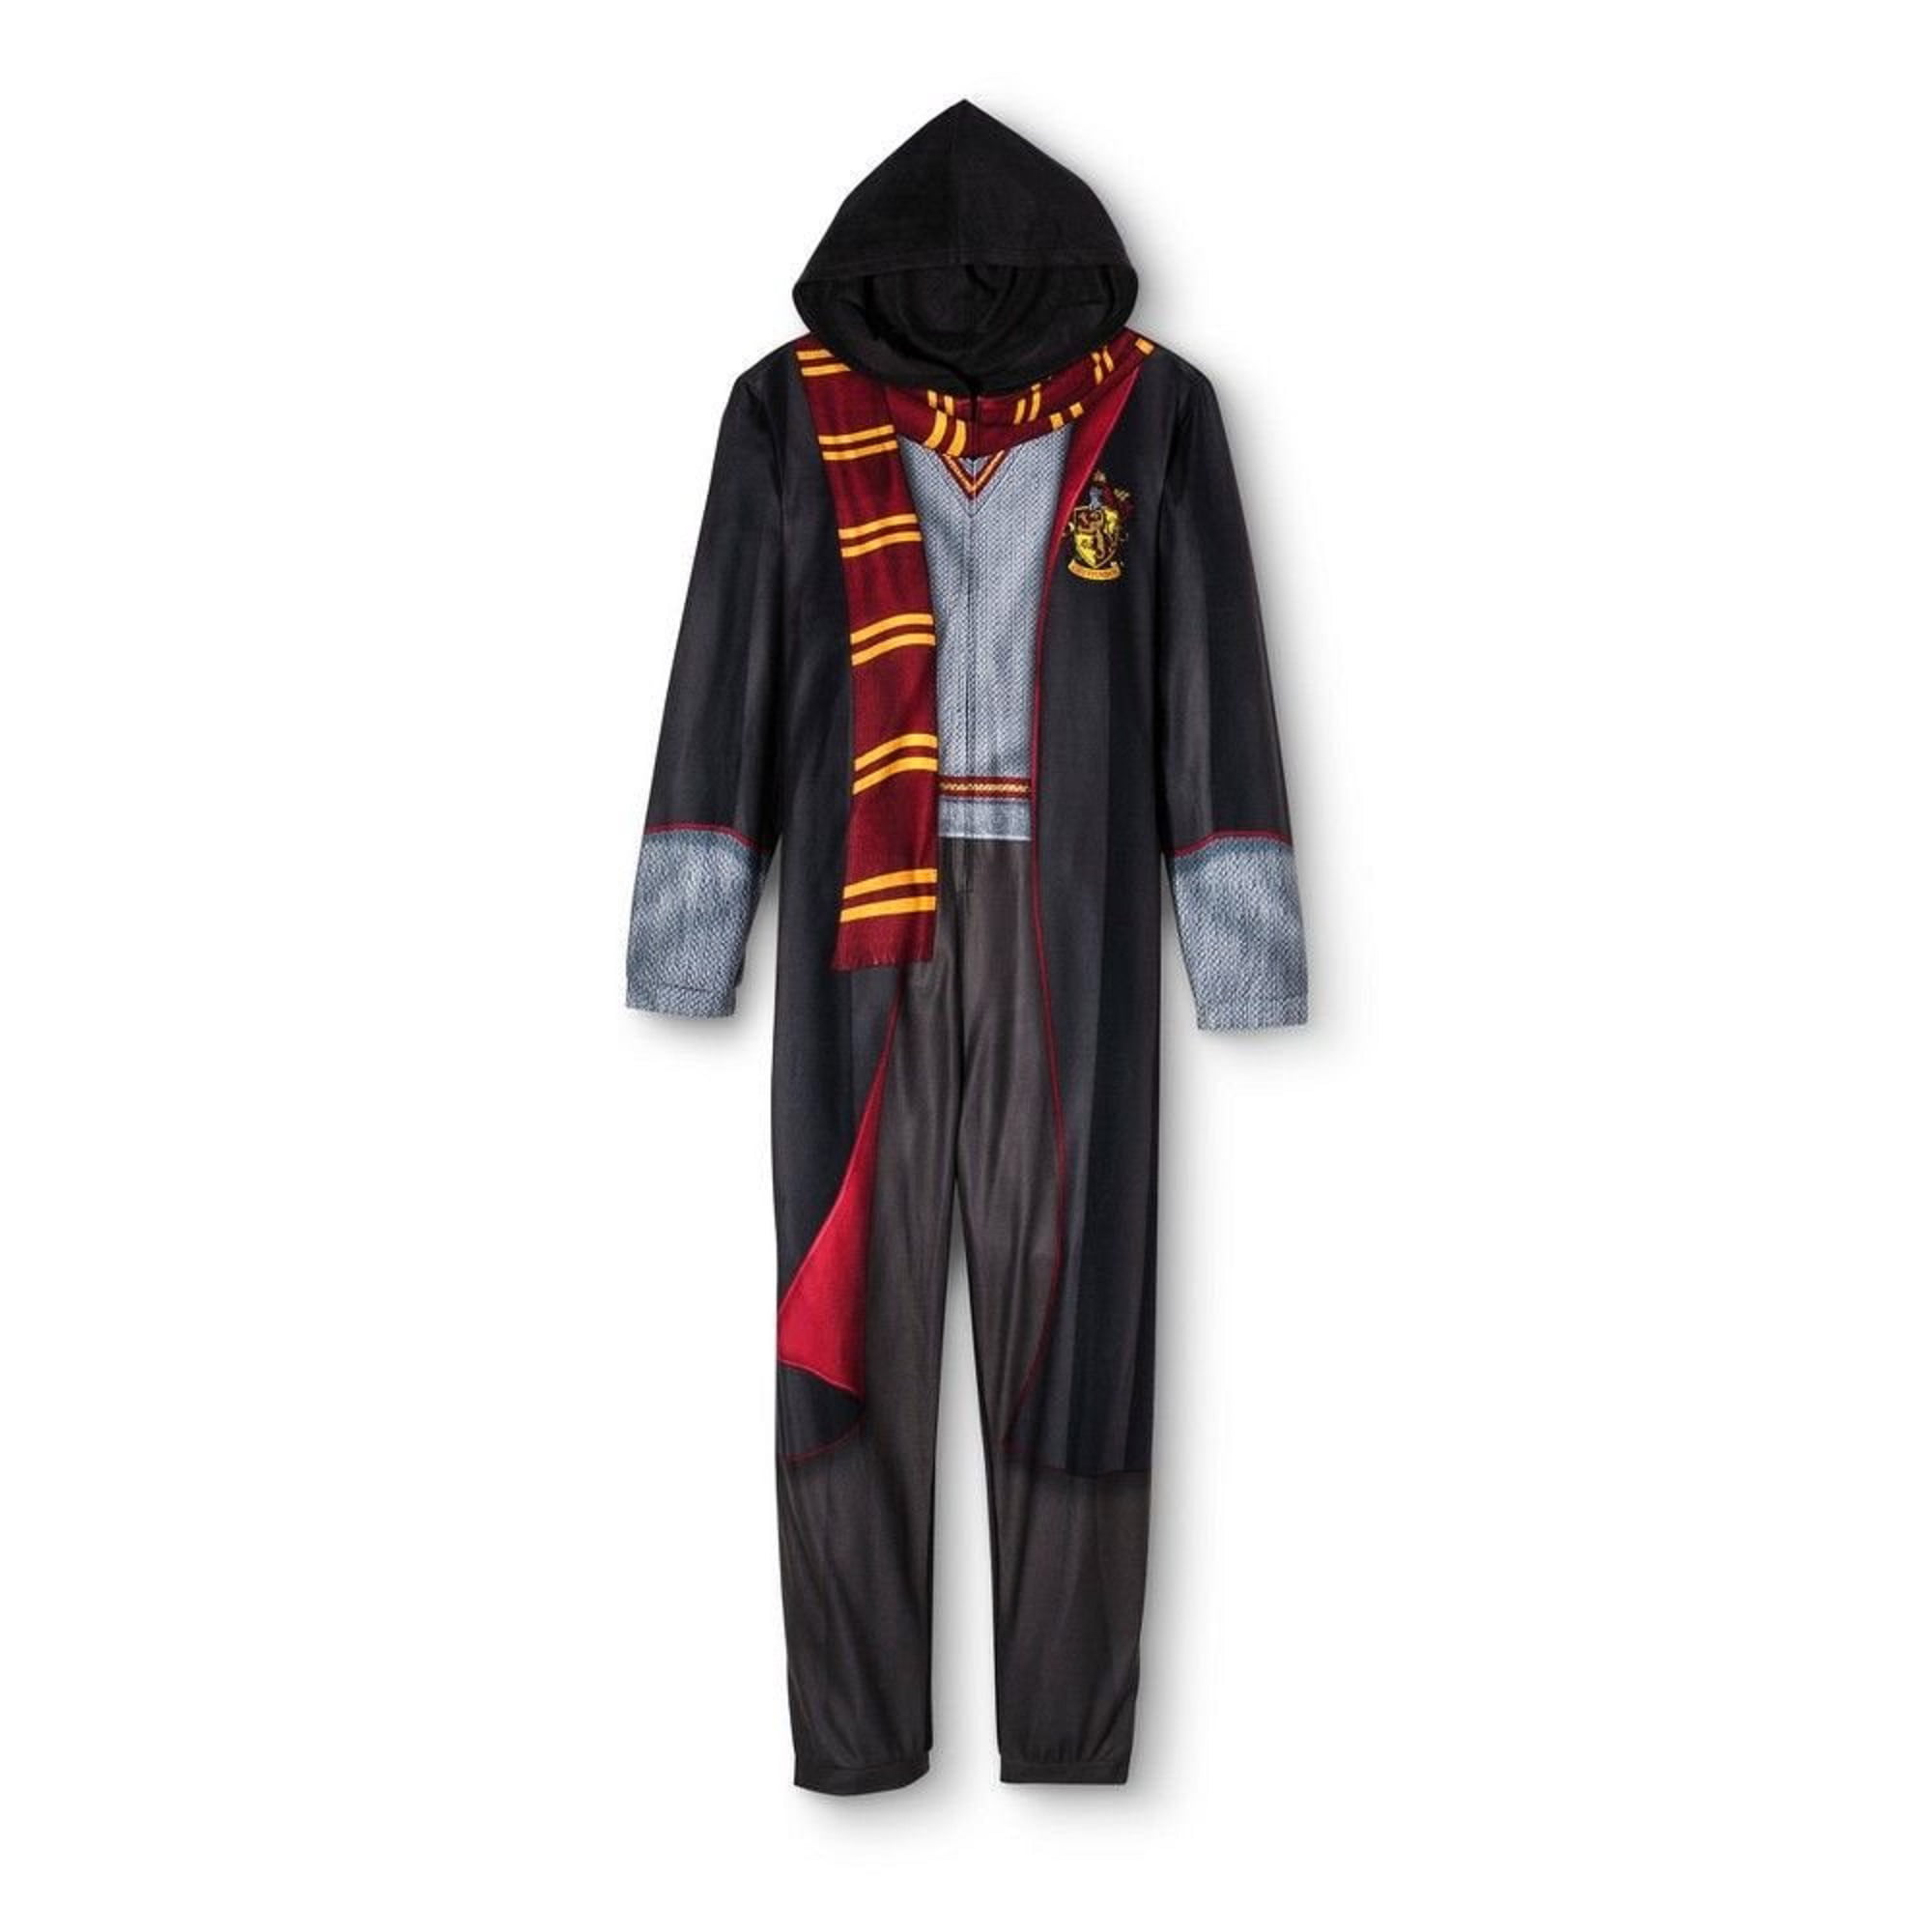 BRIEFLY STATED - Harry Potter Union Suit 1 Piece Gryffindor Pajama ...